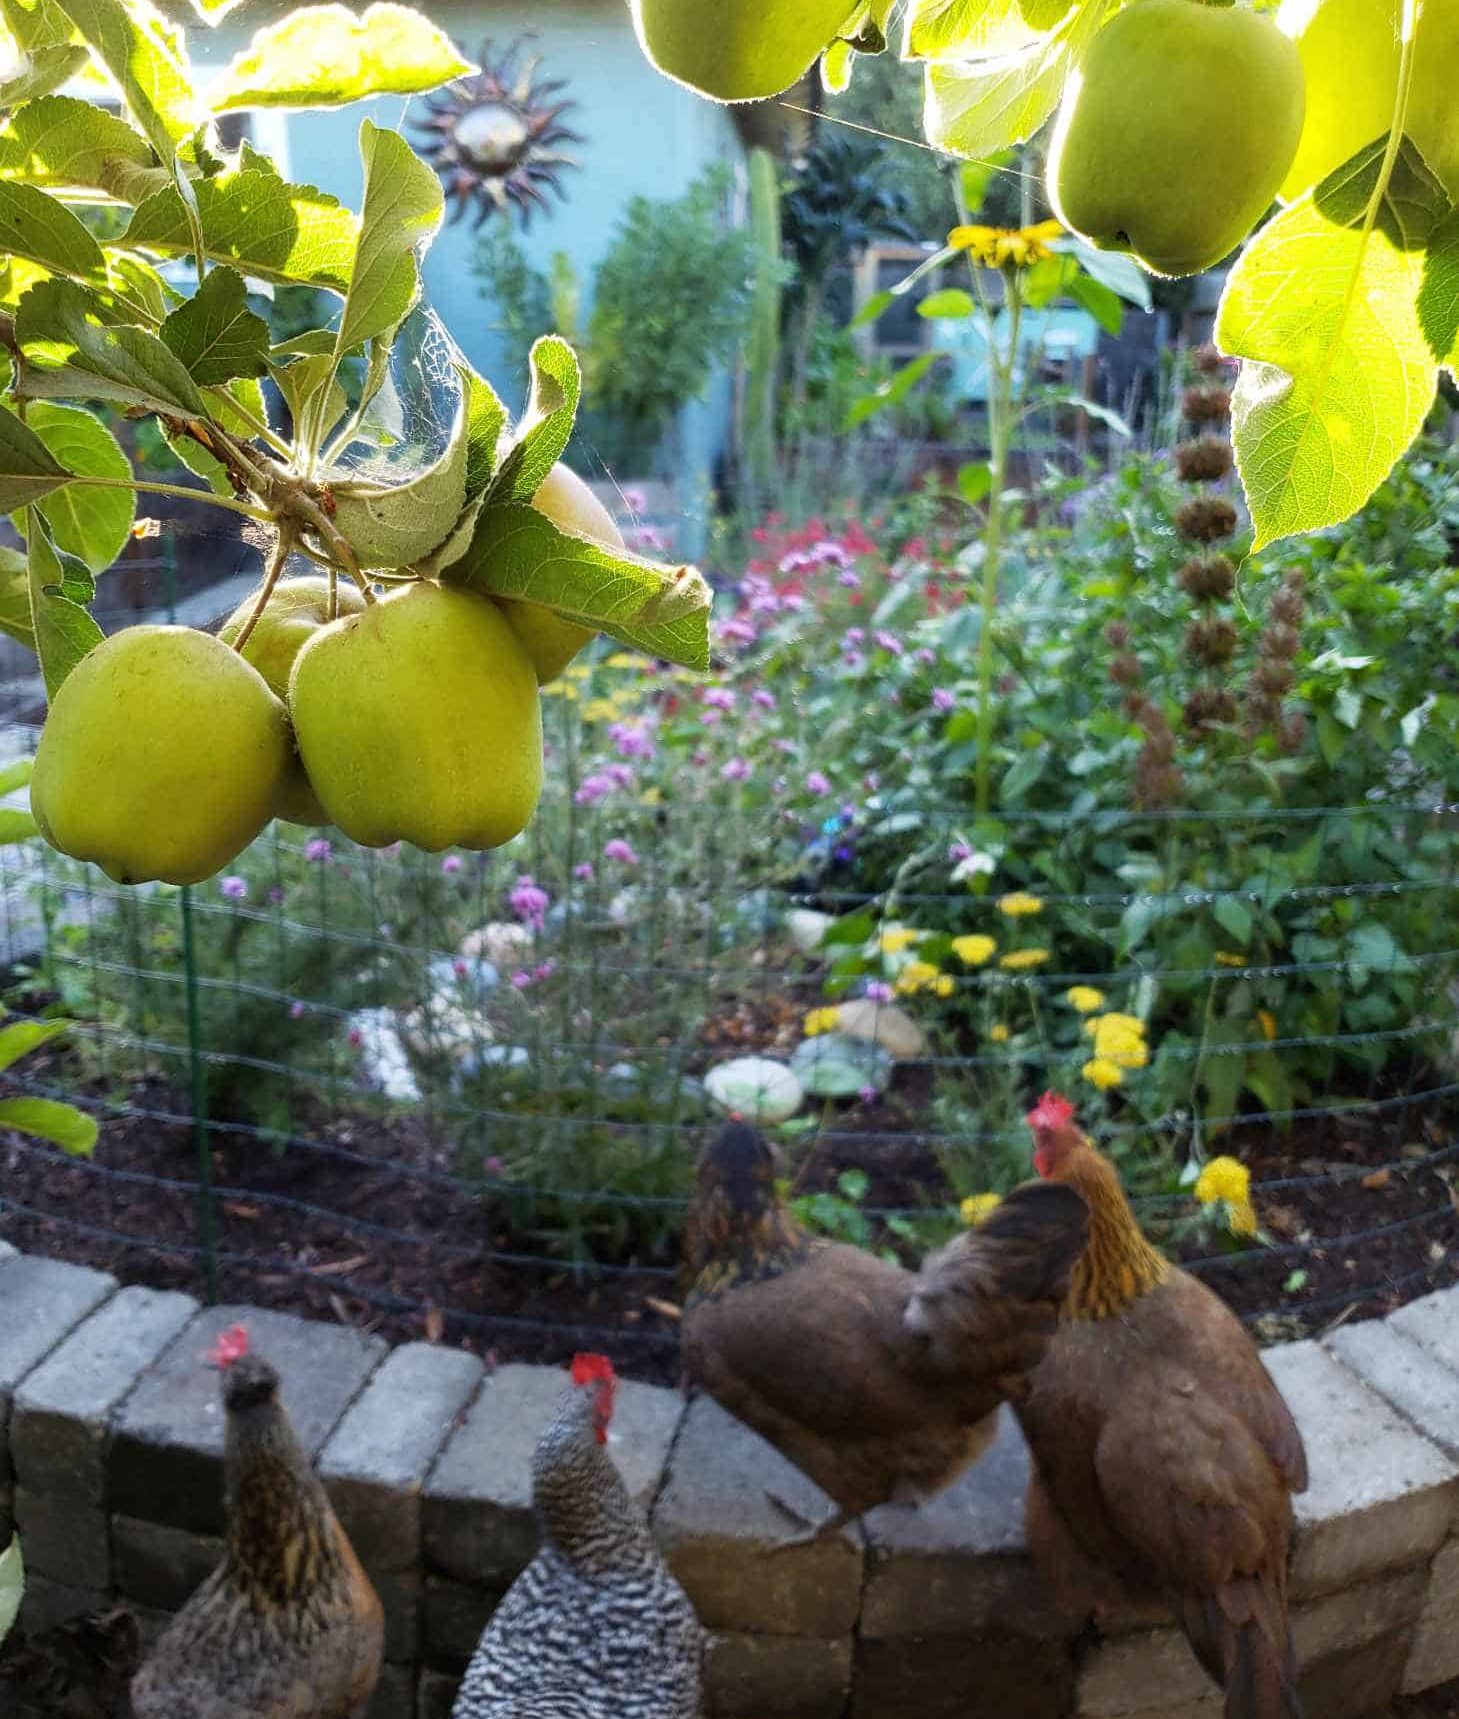 A stone raised bed full of flowering perennials, planted to attract pollinators like bees, butterflies, and hummingbirds. An apple tree dangles in front of the shot, and backyard chickens are in the foreground, enjoying the garden.